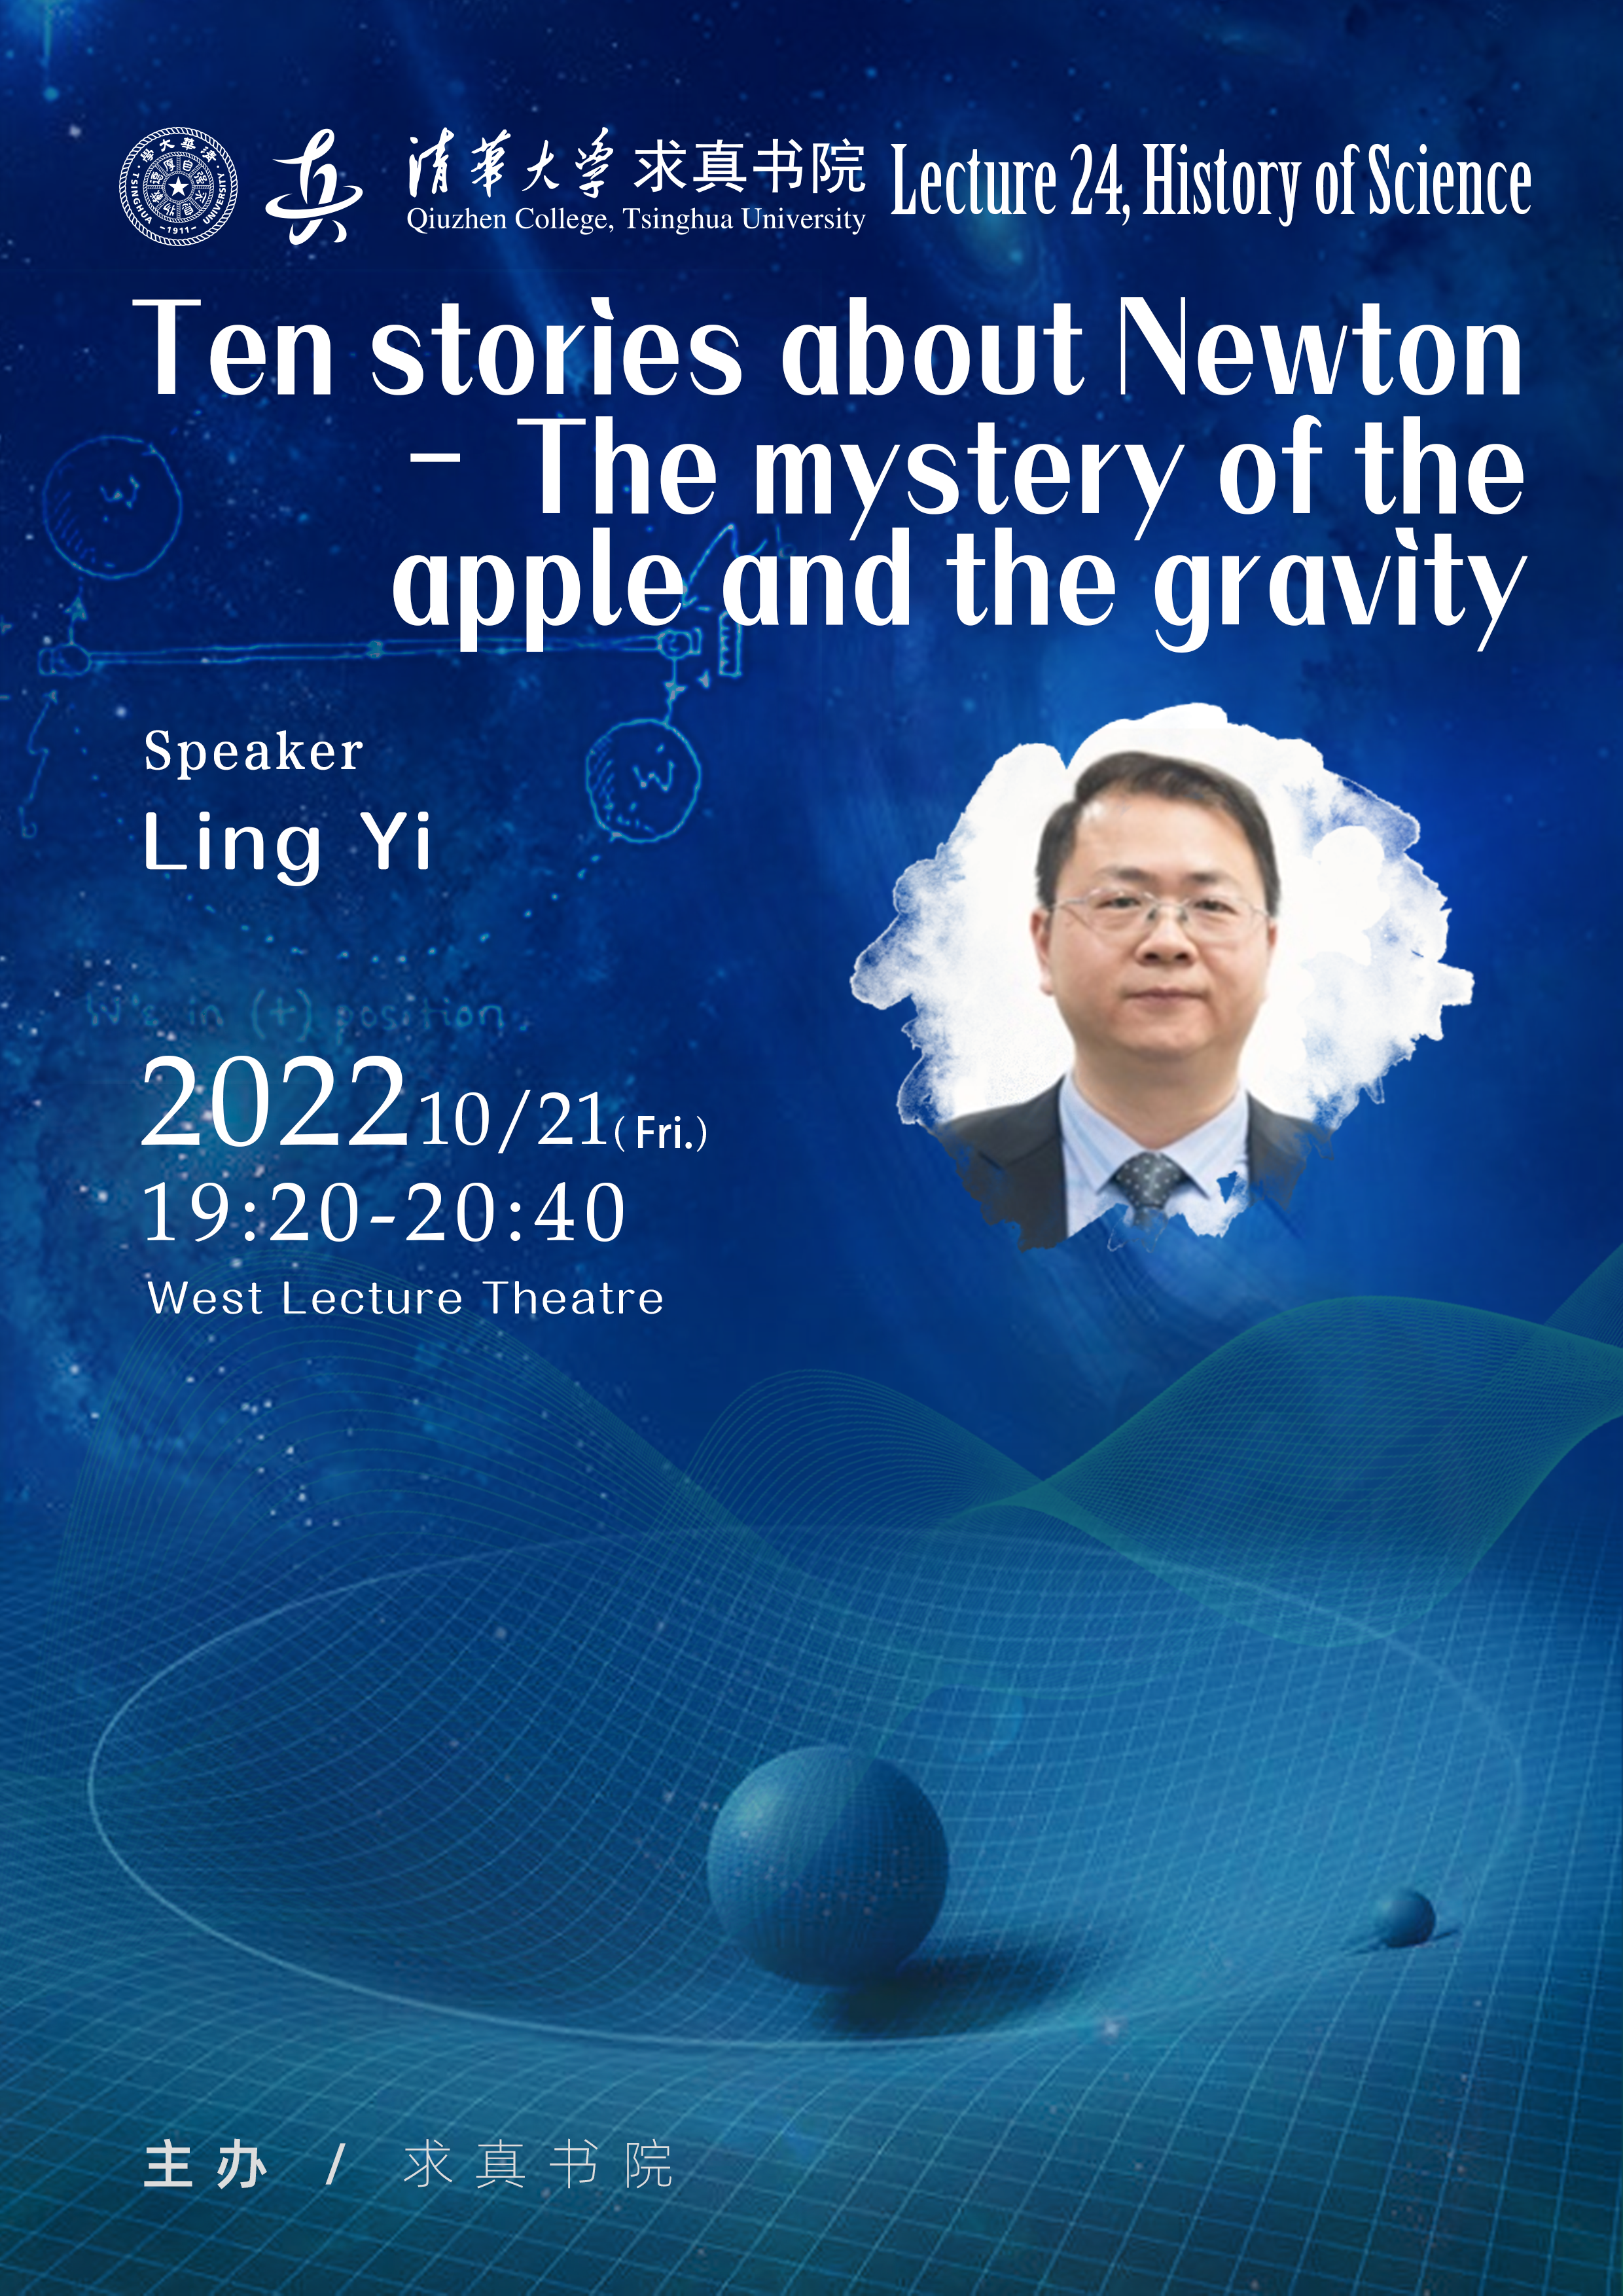 Lectures on History of Science – Lecture 24: Ten stories about Newton – The mystery of the apple and the gravity